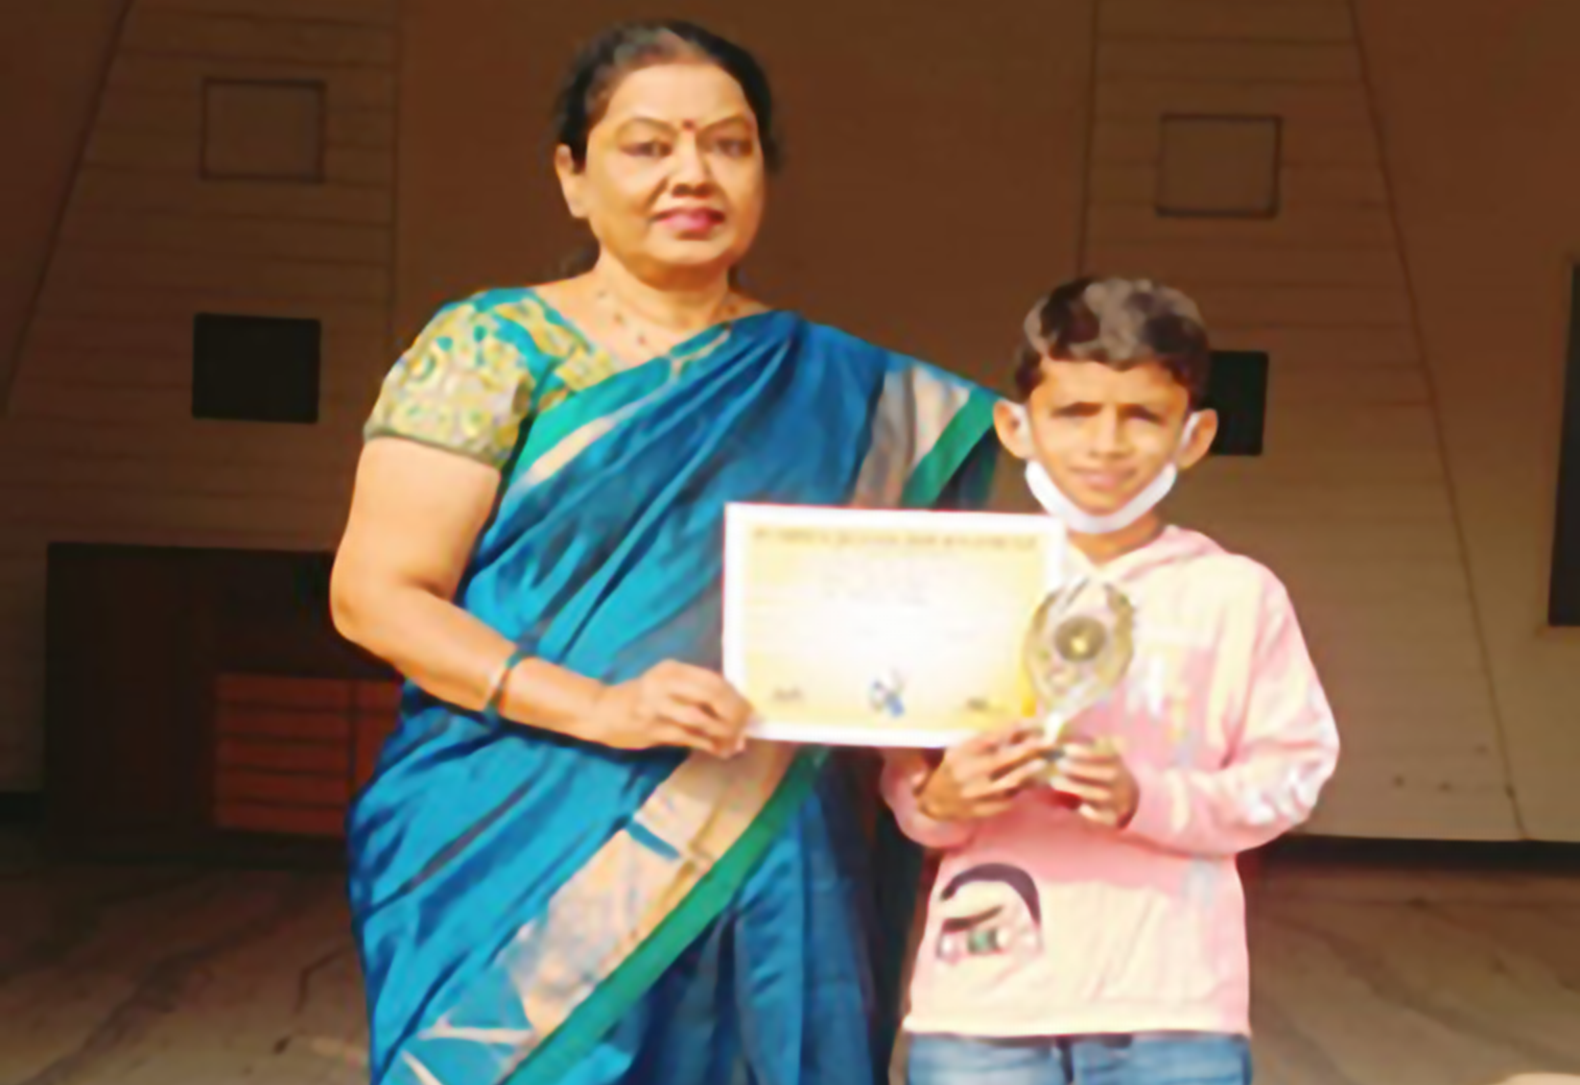 Student is with school certificate